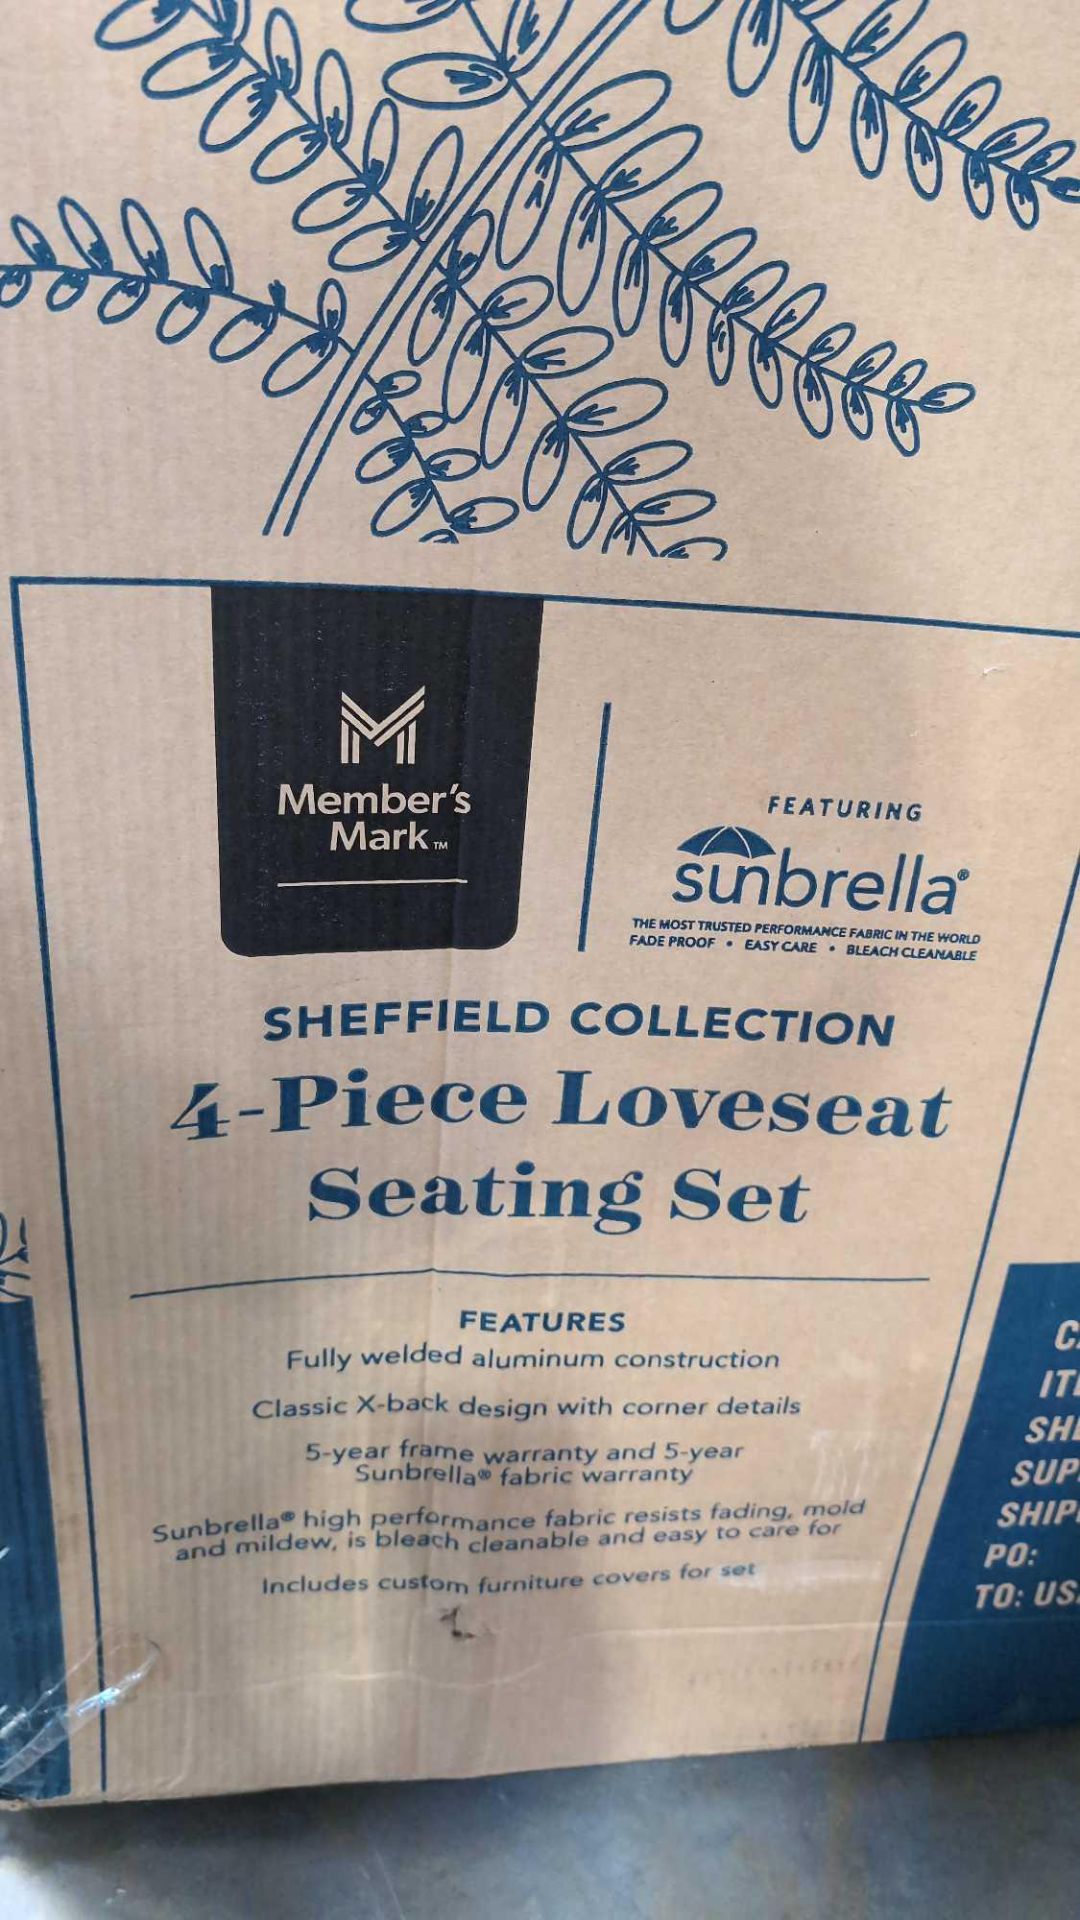 Sheffield Four piece loveseat seating set - Image 5 of 5